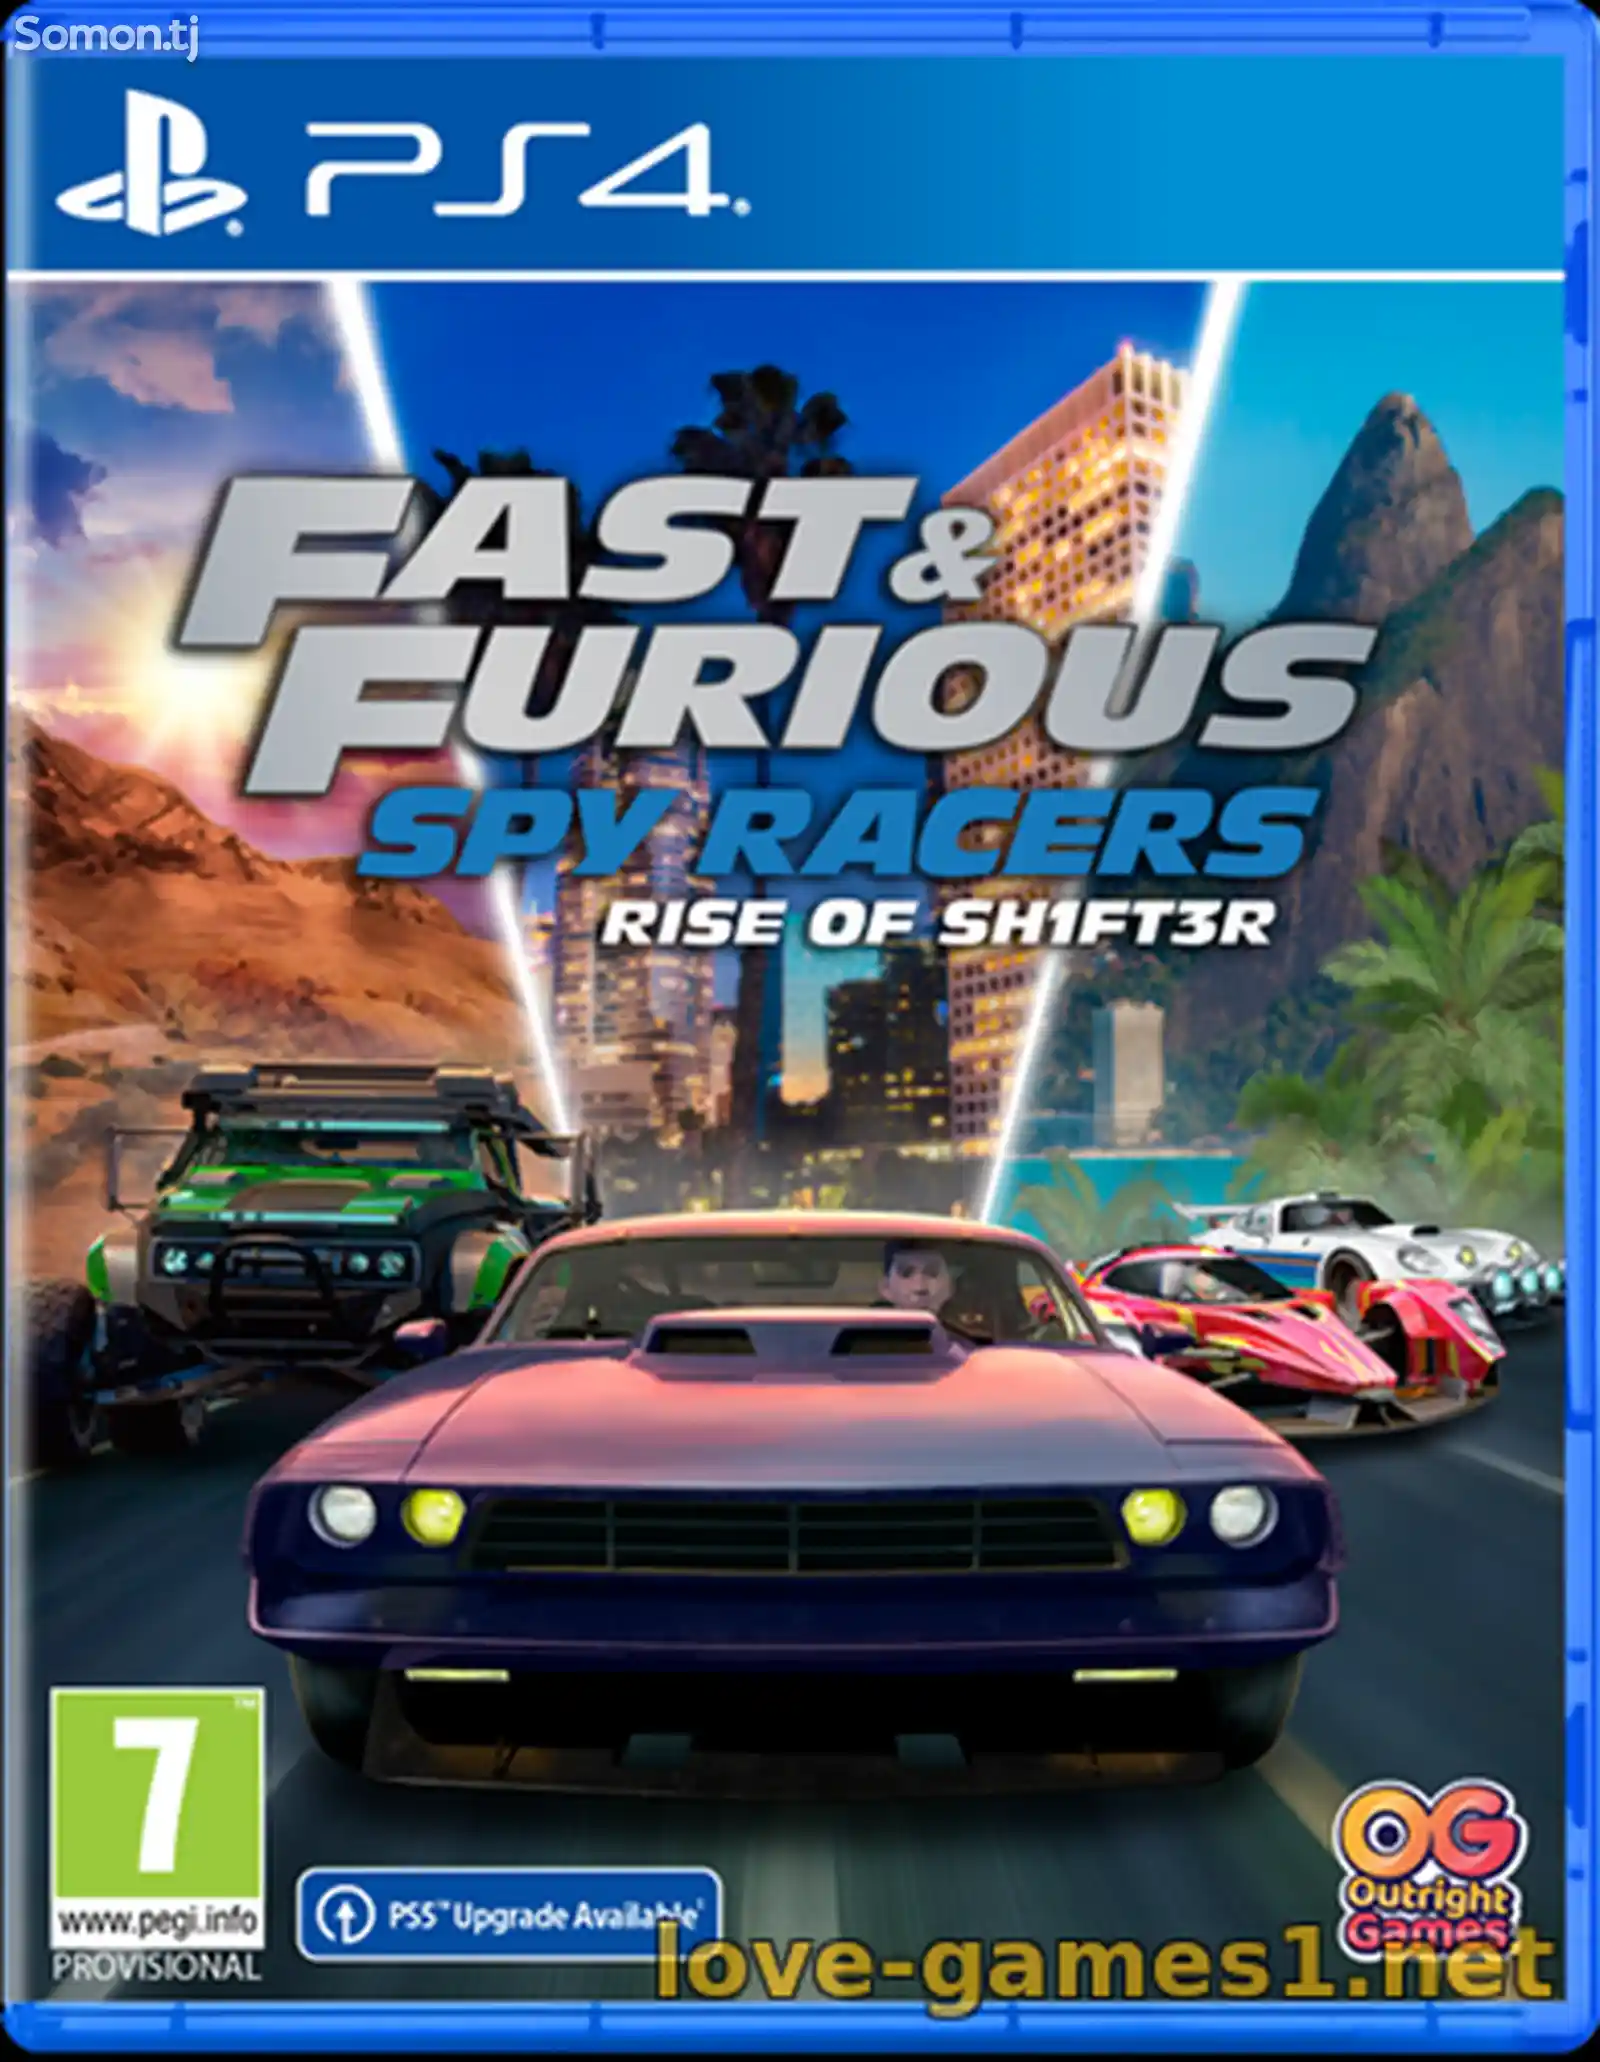 Игра Fast and furious spy racers для PS-4 / 5.05 / 6.72 / 7.02 / 7.5-1